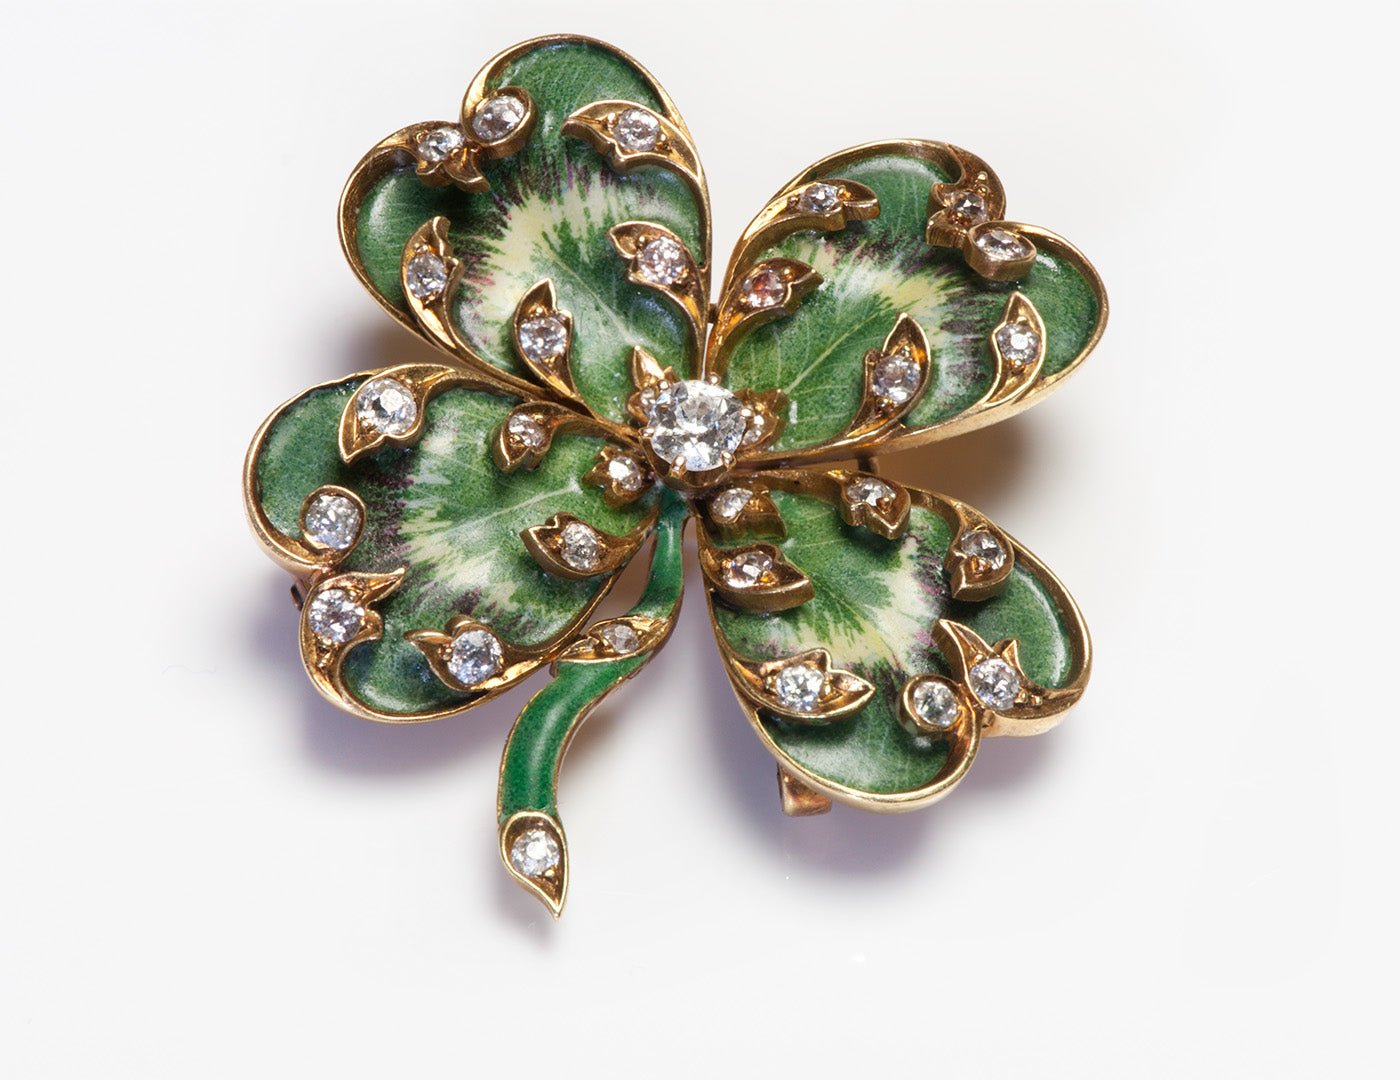 10 Reasons to Wear a Brooch - DSF Antique Jewelry